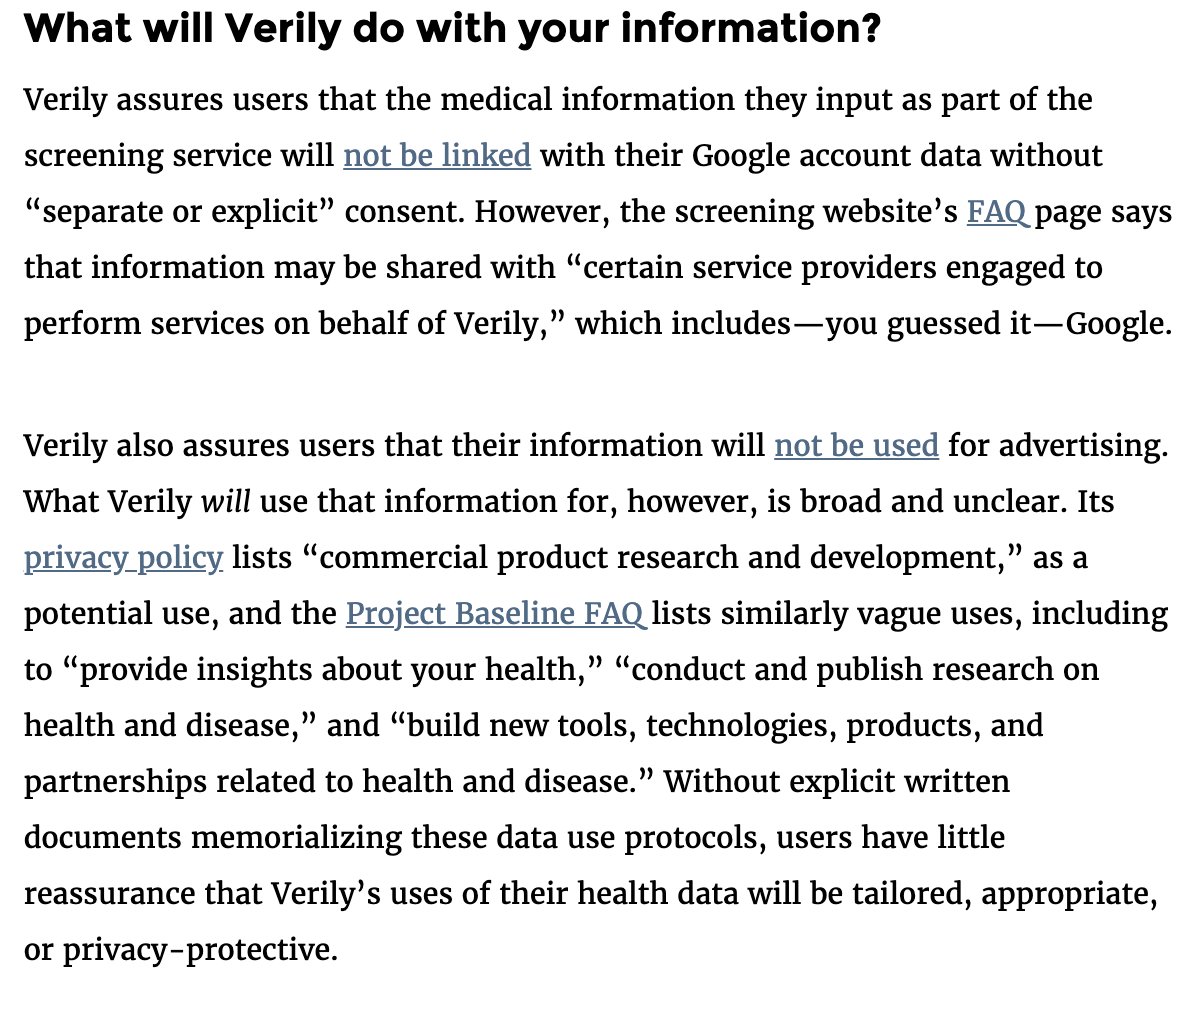 6/A week ago, Google launched its "Verily" COVID-19 screening & testing website, which requires a Google account to log on & gives amorphous answers to basic q's about who it will share data with and why: https://www.eff.org/deeplinks/2020/03/verilys-covid-19-screening-website-leaves-privacy-questions-unanswered